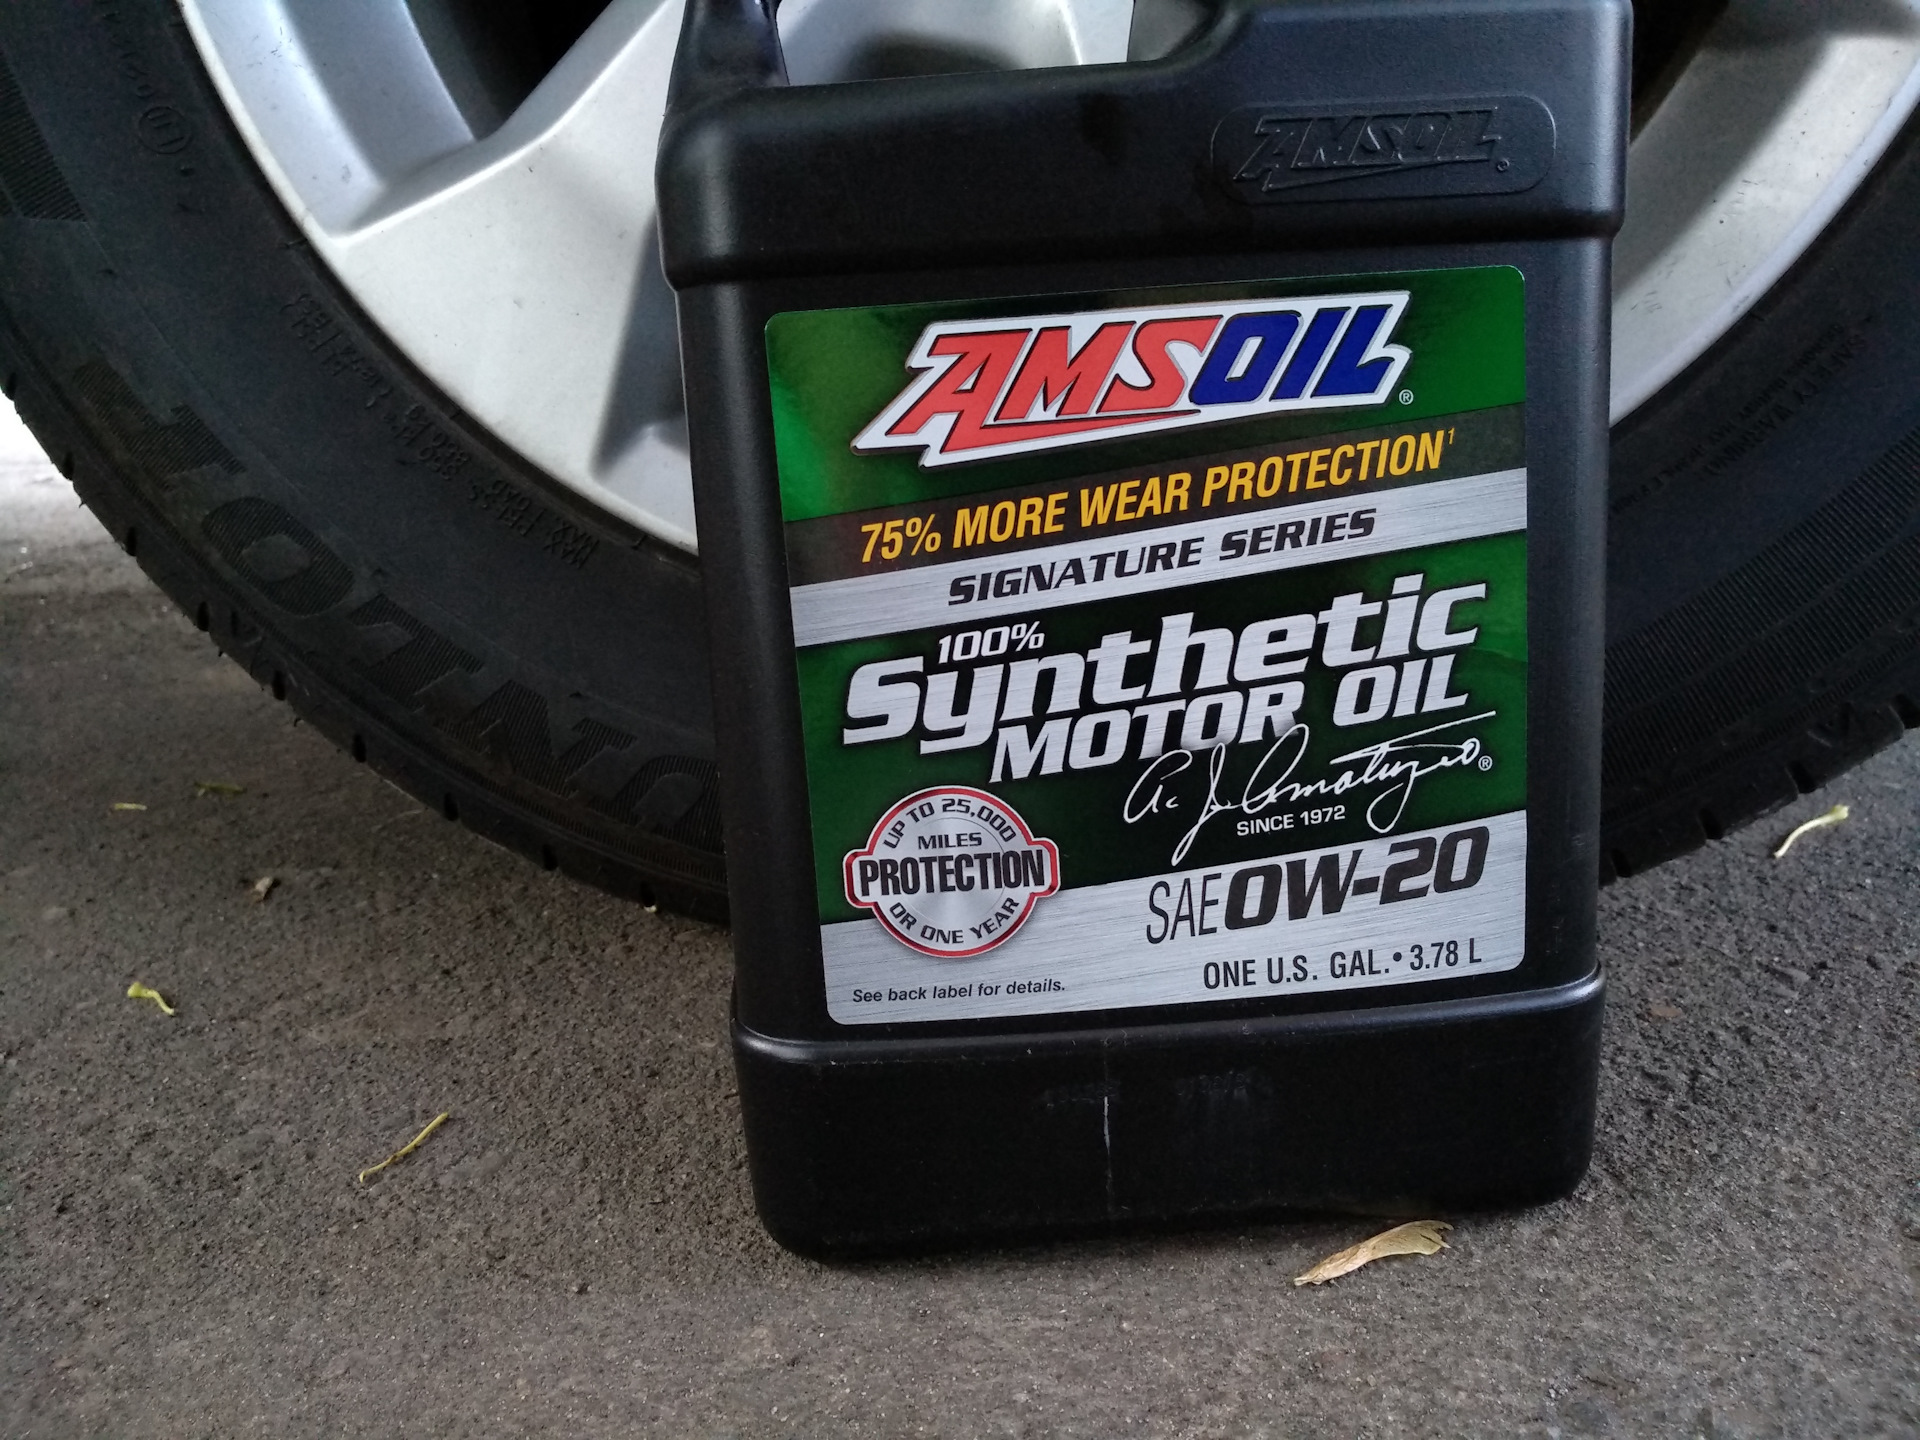 Amsoil signature series synthetic. 0w-20 AMSOIL SS. Signature Series 0w-20 Synthetic Motor Oil. AMSOIL 0w20 Signature Series. AMSOIL Signature Series 100% Synthetic 0w-20.